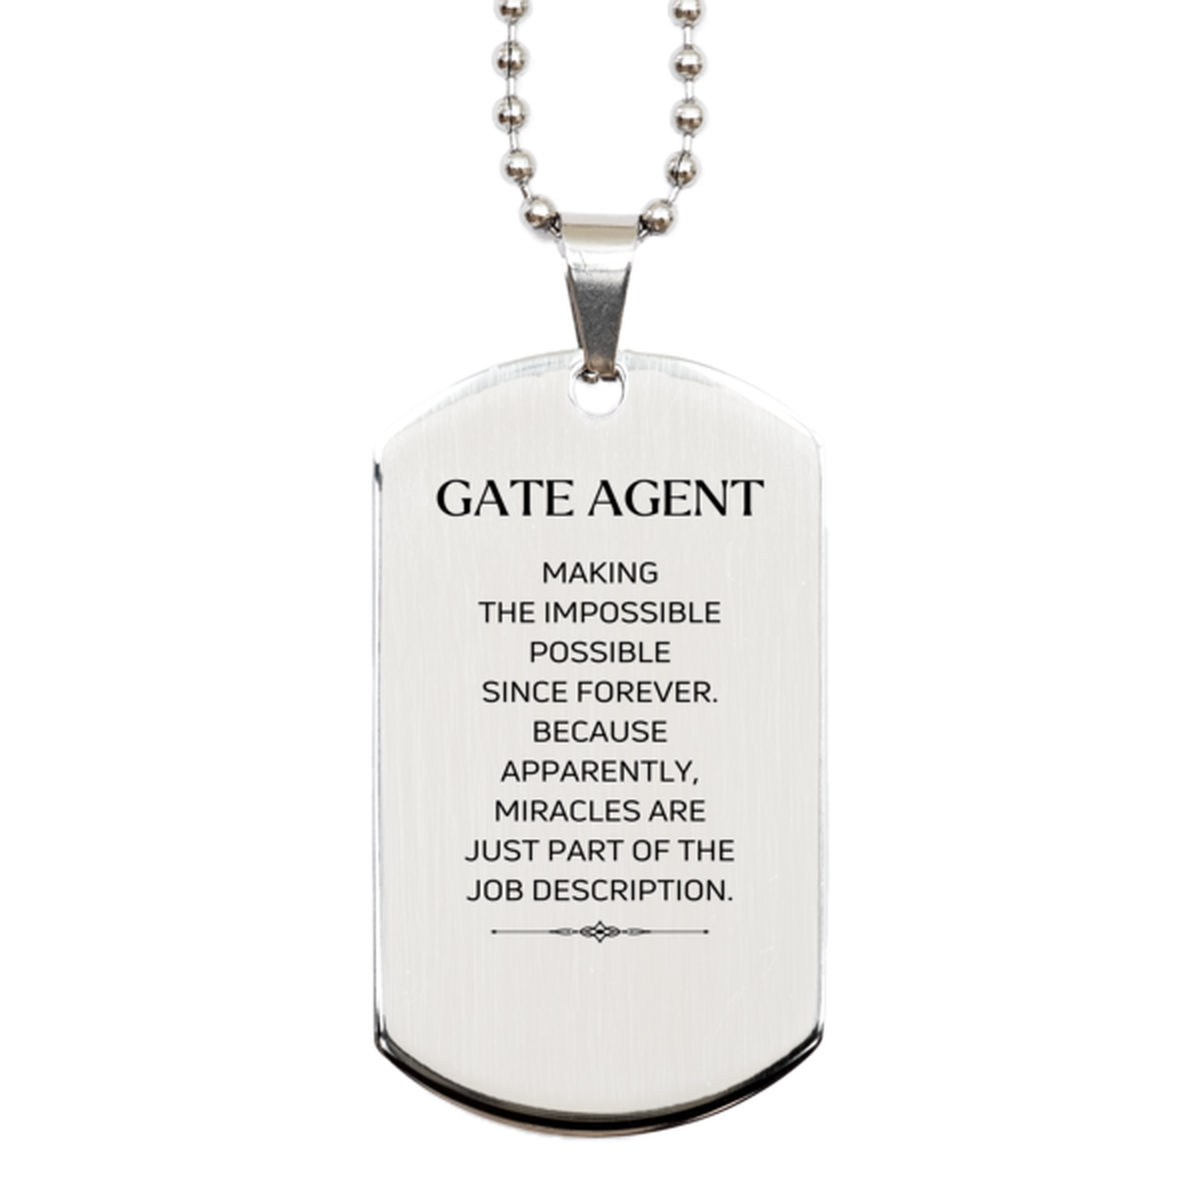 Funny Gate Agent Gifts, Miracles are just part of the job description, Inspirational Birthday Silver Dog Tag For Gate Agent, Men, Women, Coworkers, Friends, Boss